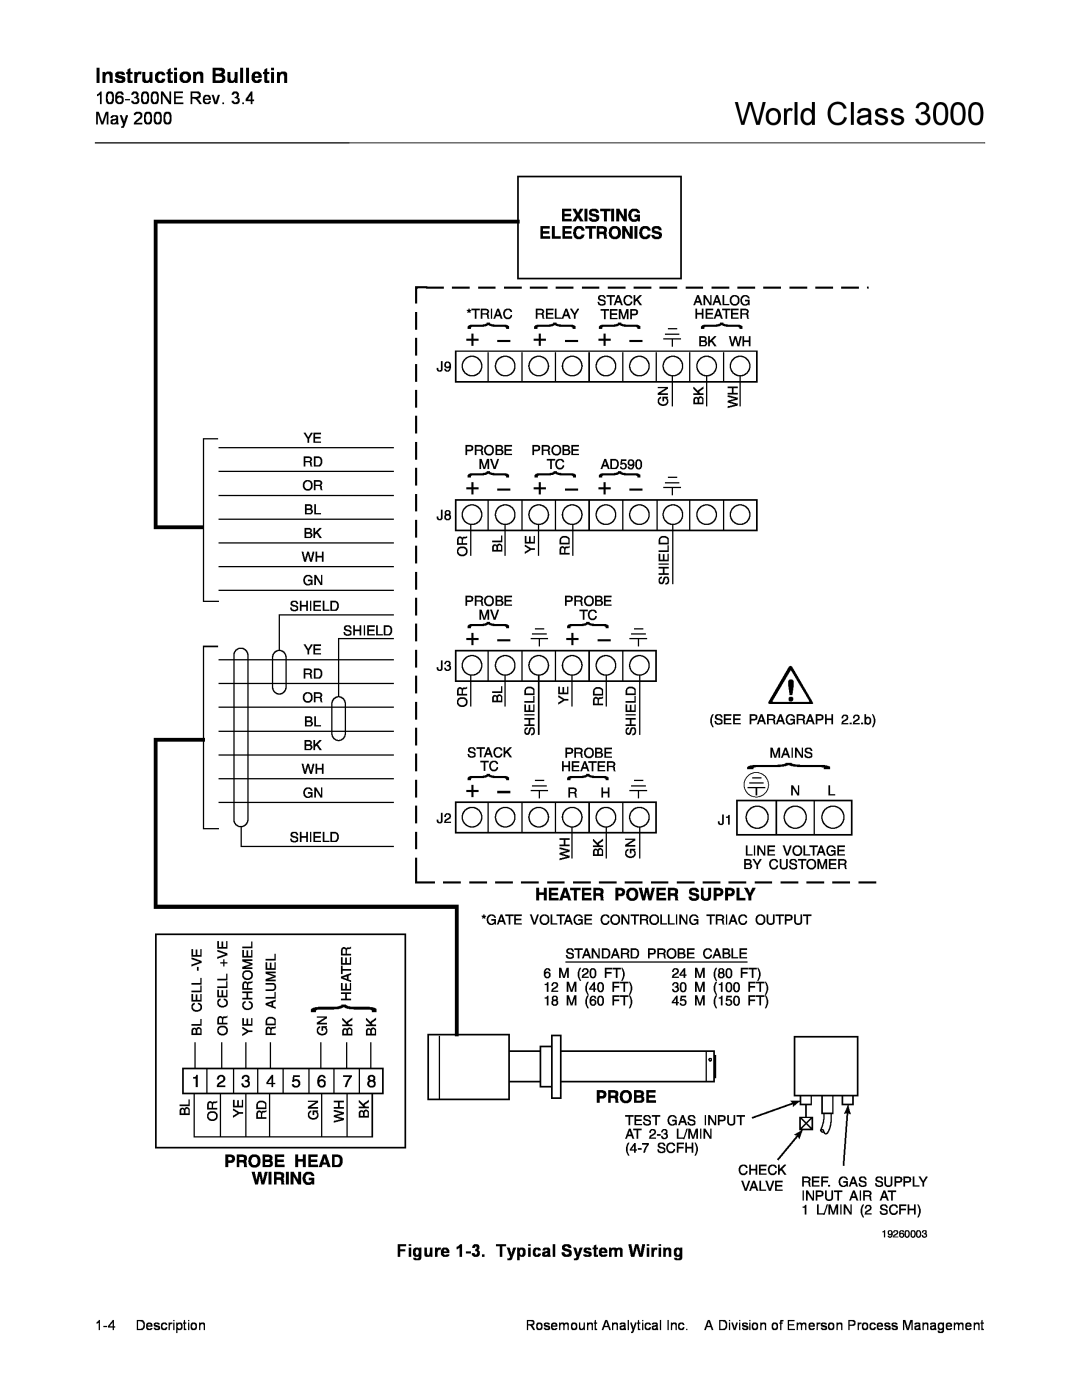 Emerson 3000 Instruction Bulletin, Existing Electronics, Heater Power Supply, Probe Head Wiring, 3.Typical System Wiring 